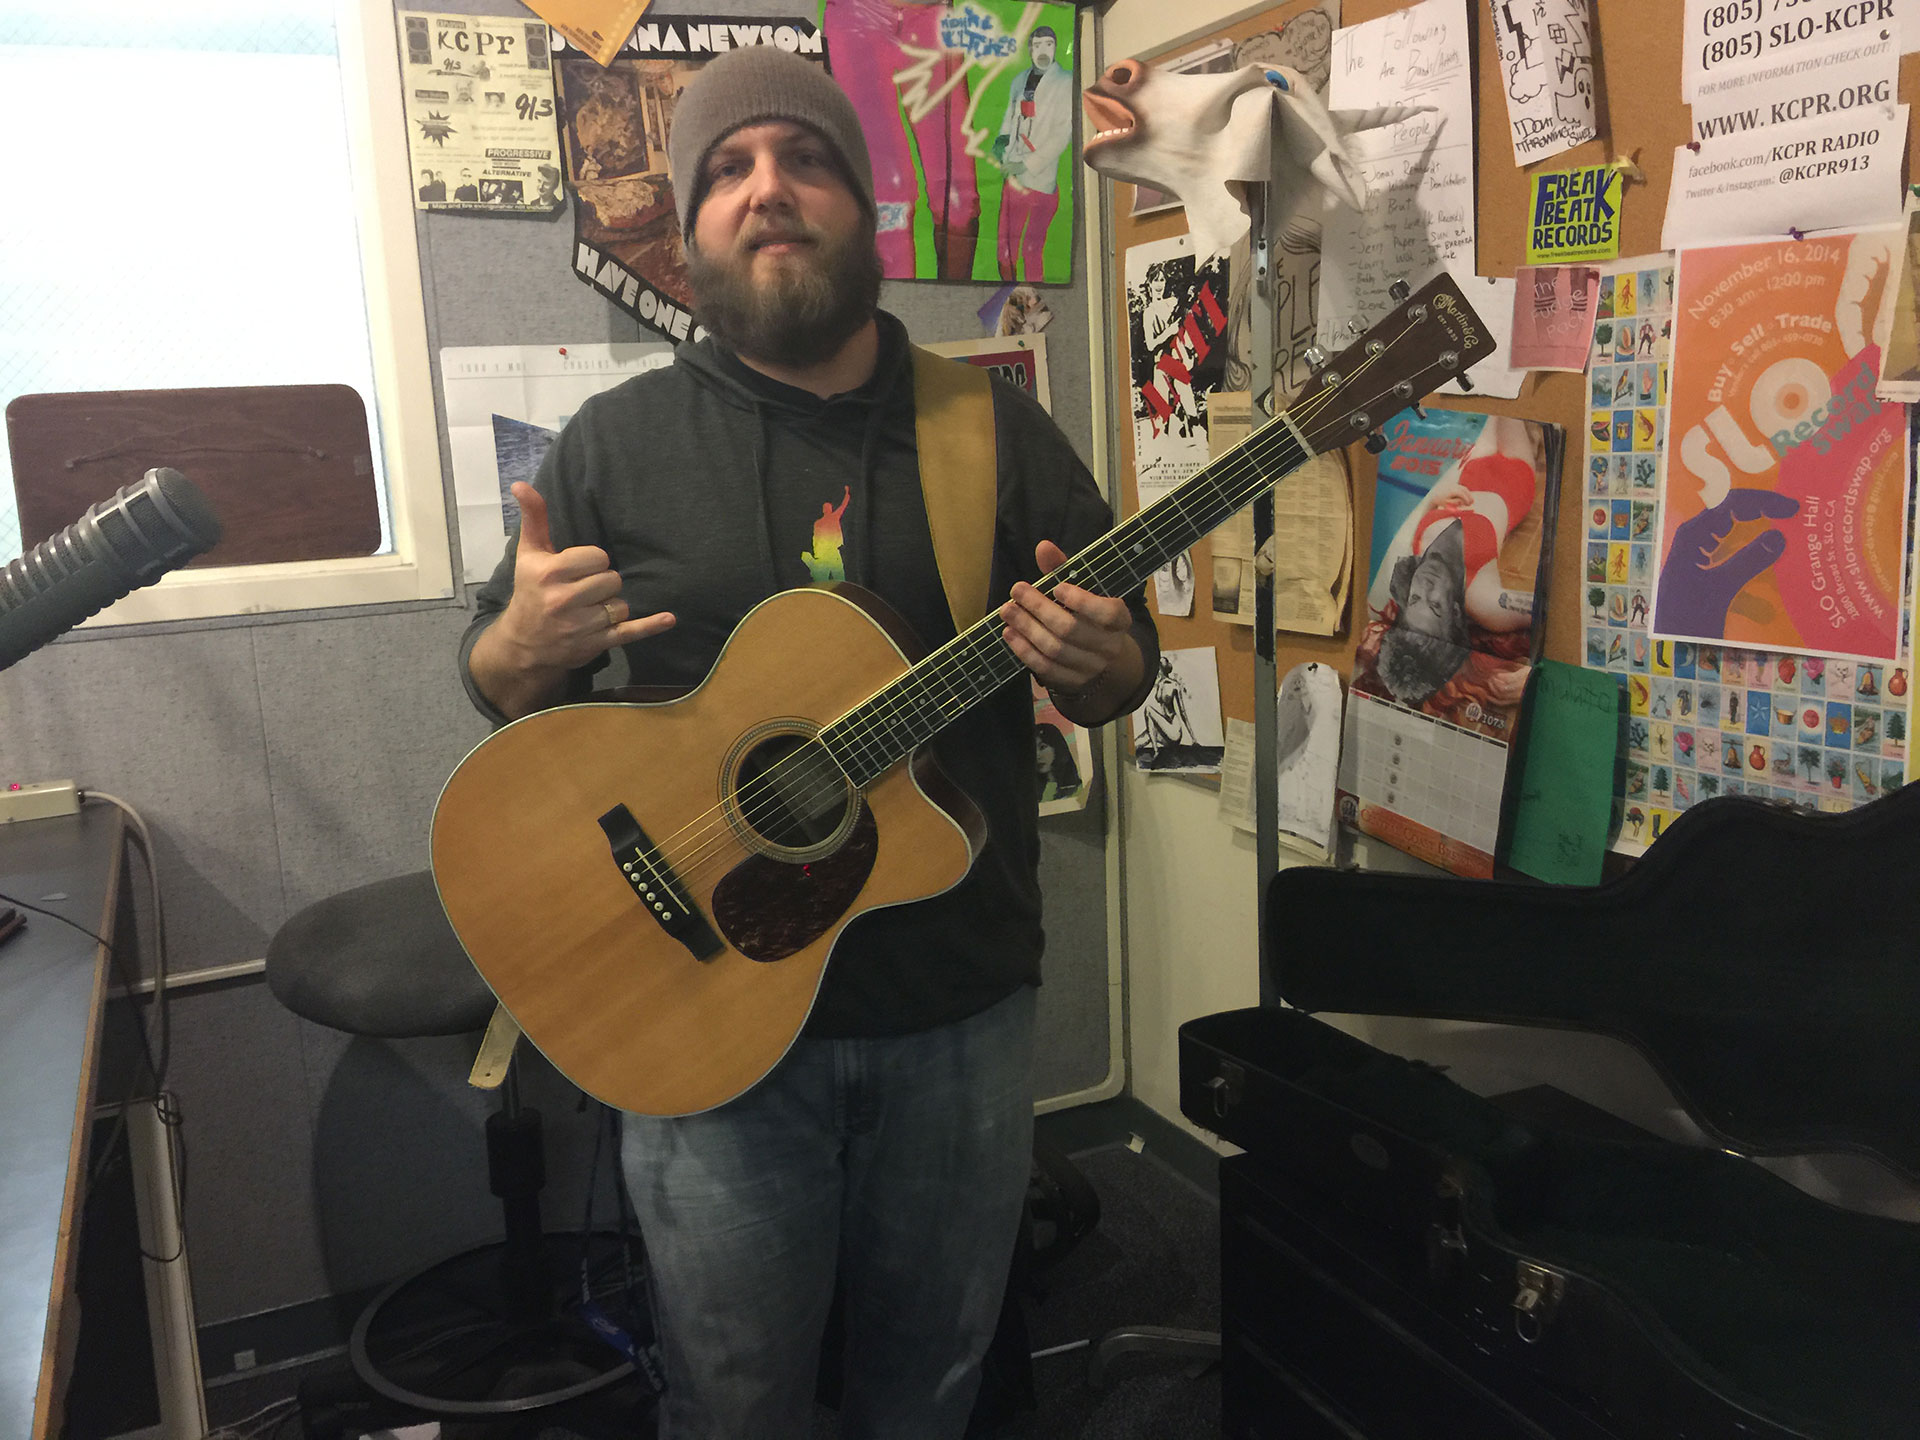 Suarez is a local singer/songwriter who plays at bars, including Creekside Brewery and Frog and Peach Pub, almost every week. He has been on KCPR twice before to perform but this was his first full-length interview.

“I thought being on a talk show was really fun. It went much more smoothly than I thought it would.”